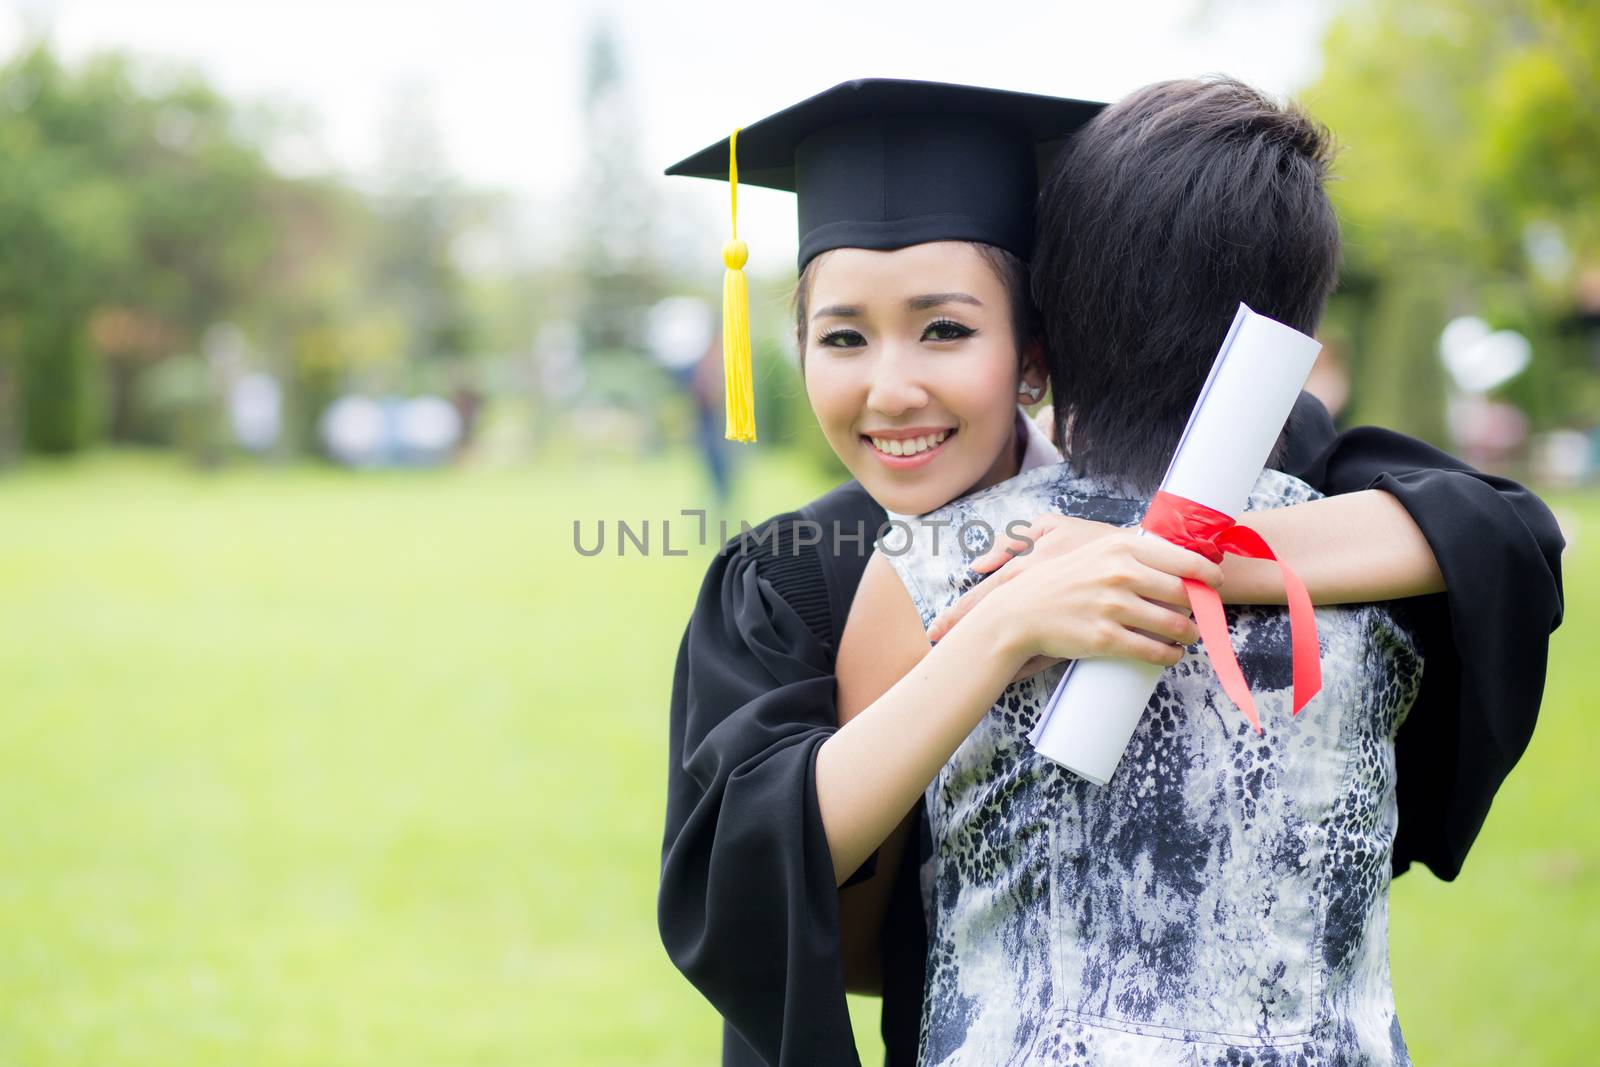 young female graduate hugging her friend at graduation ceremony